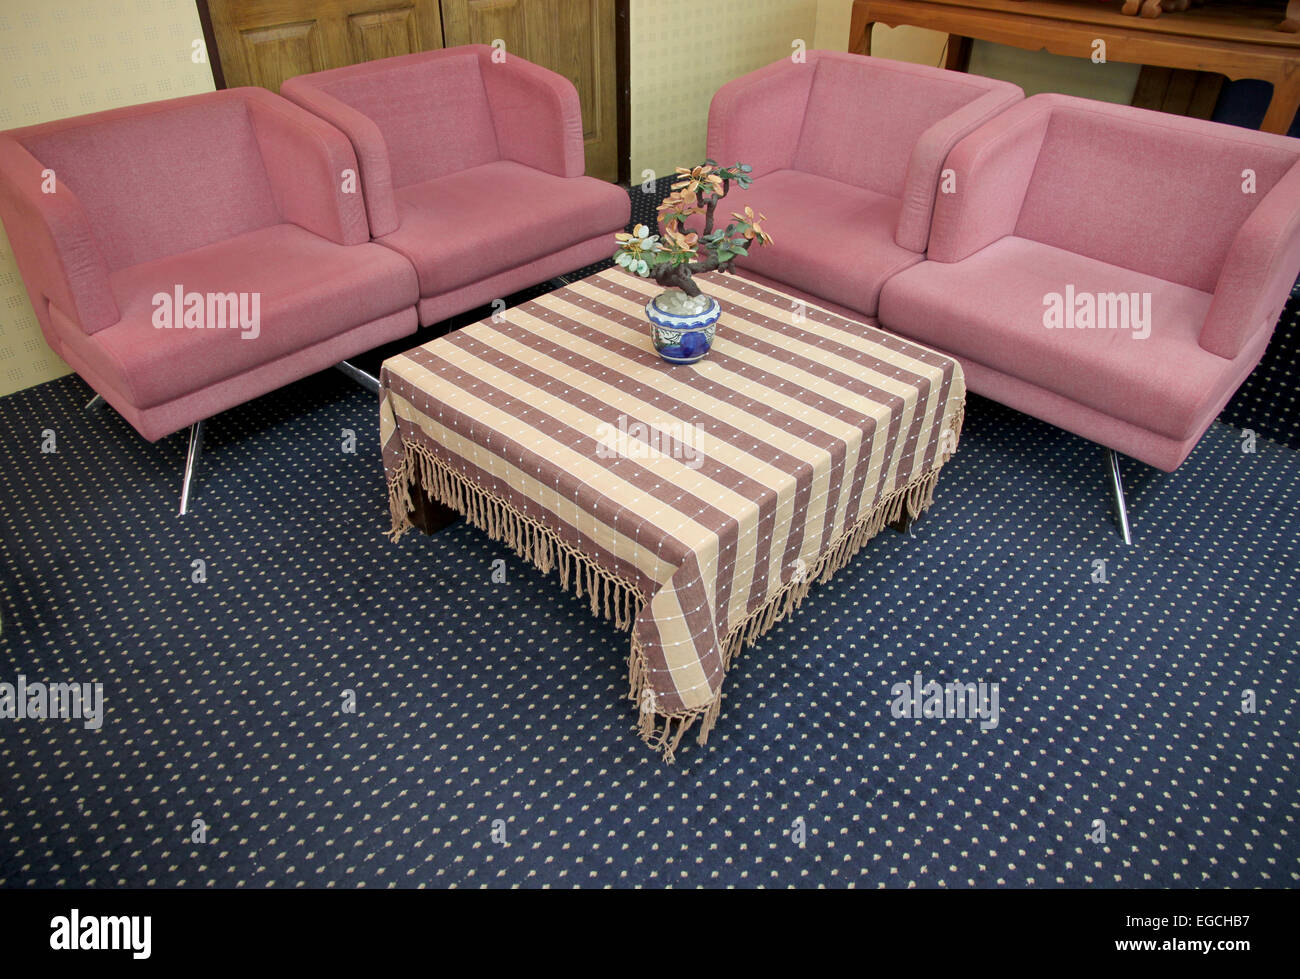 Sofa set in the meeting room for interior background. Stock Photo